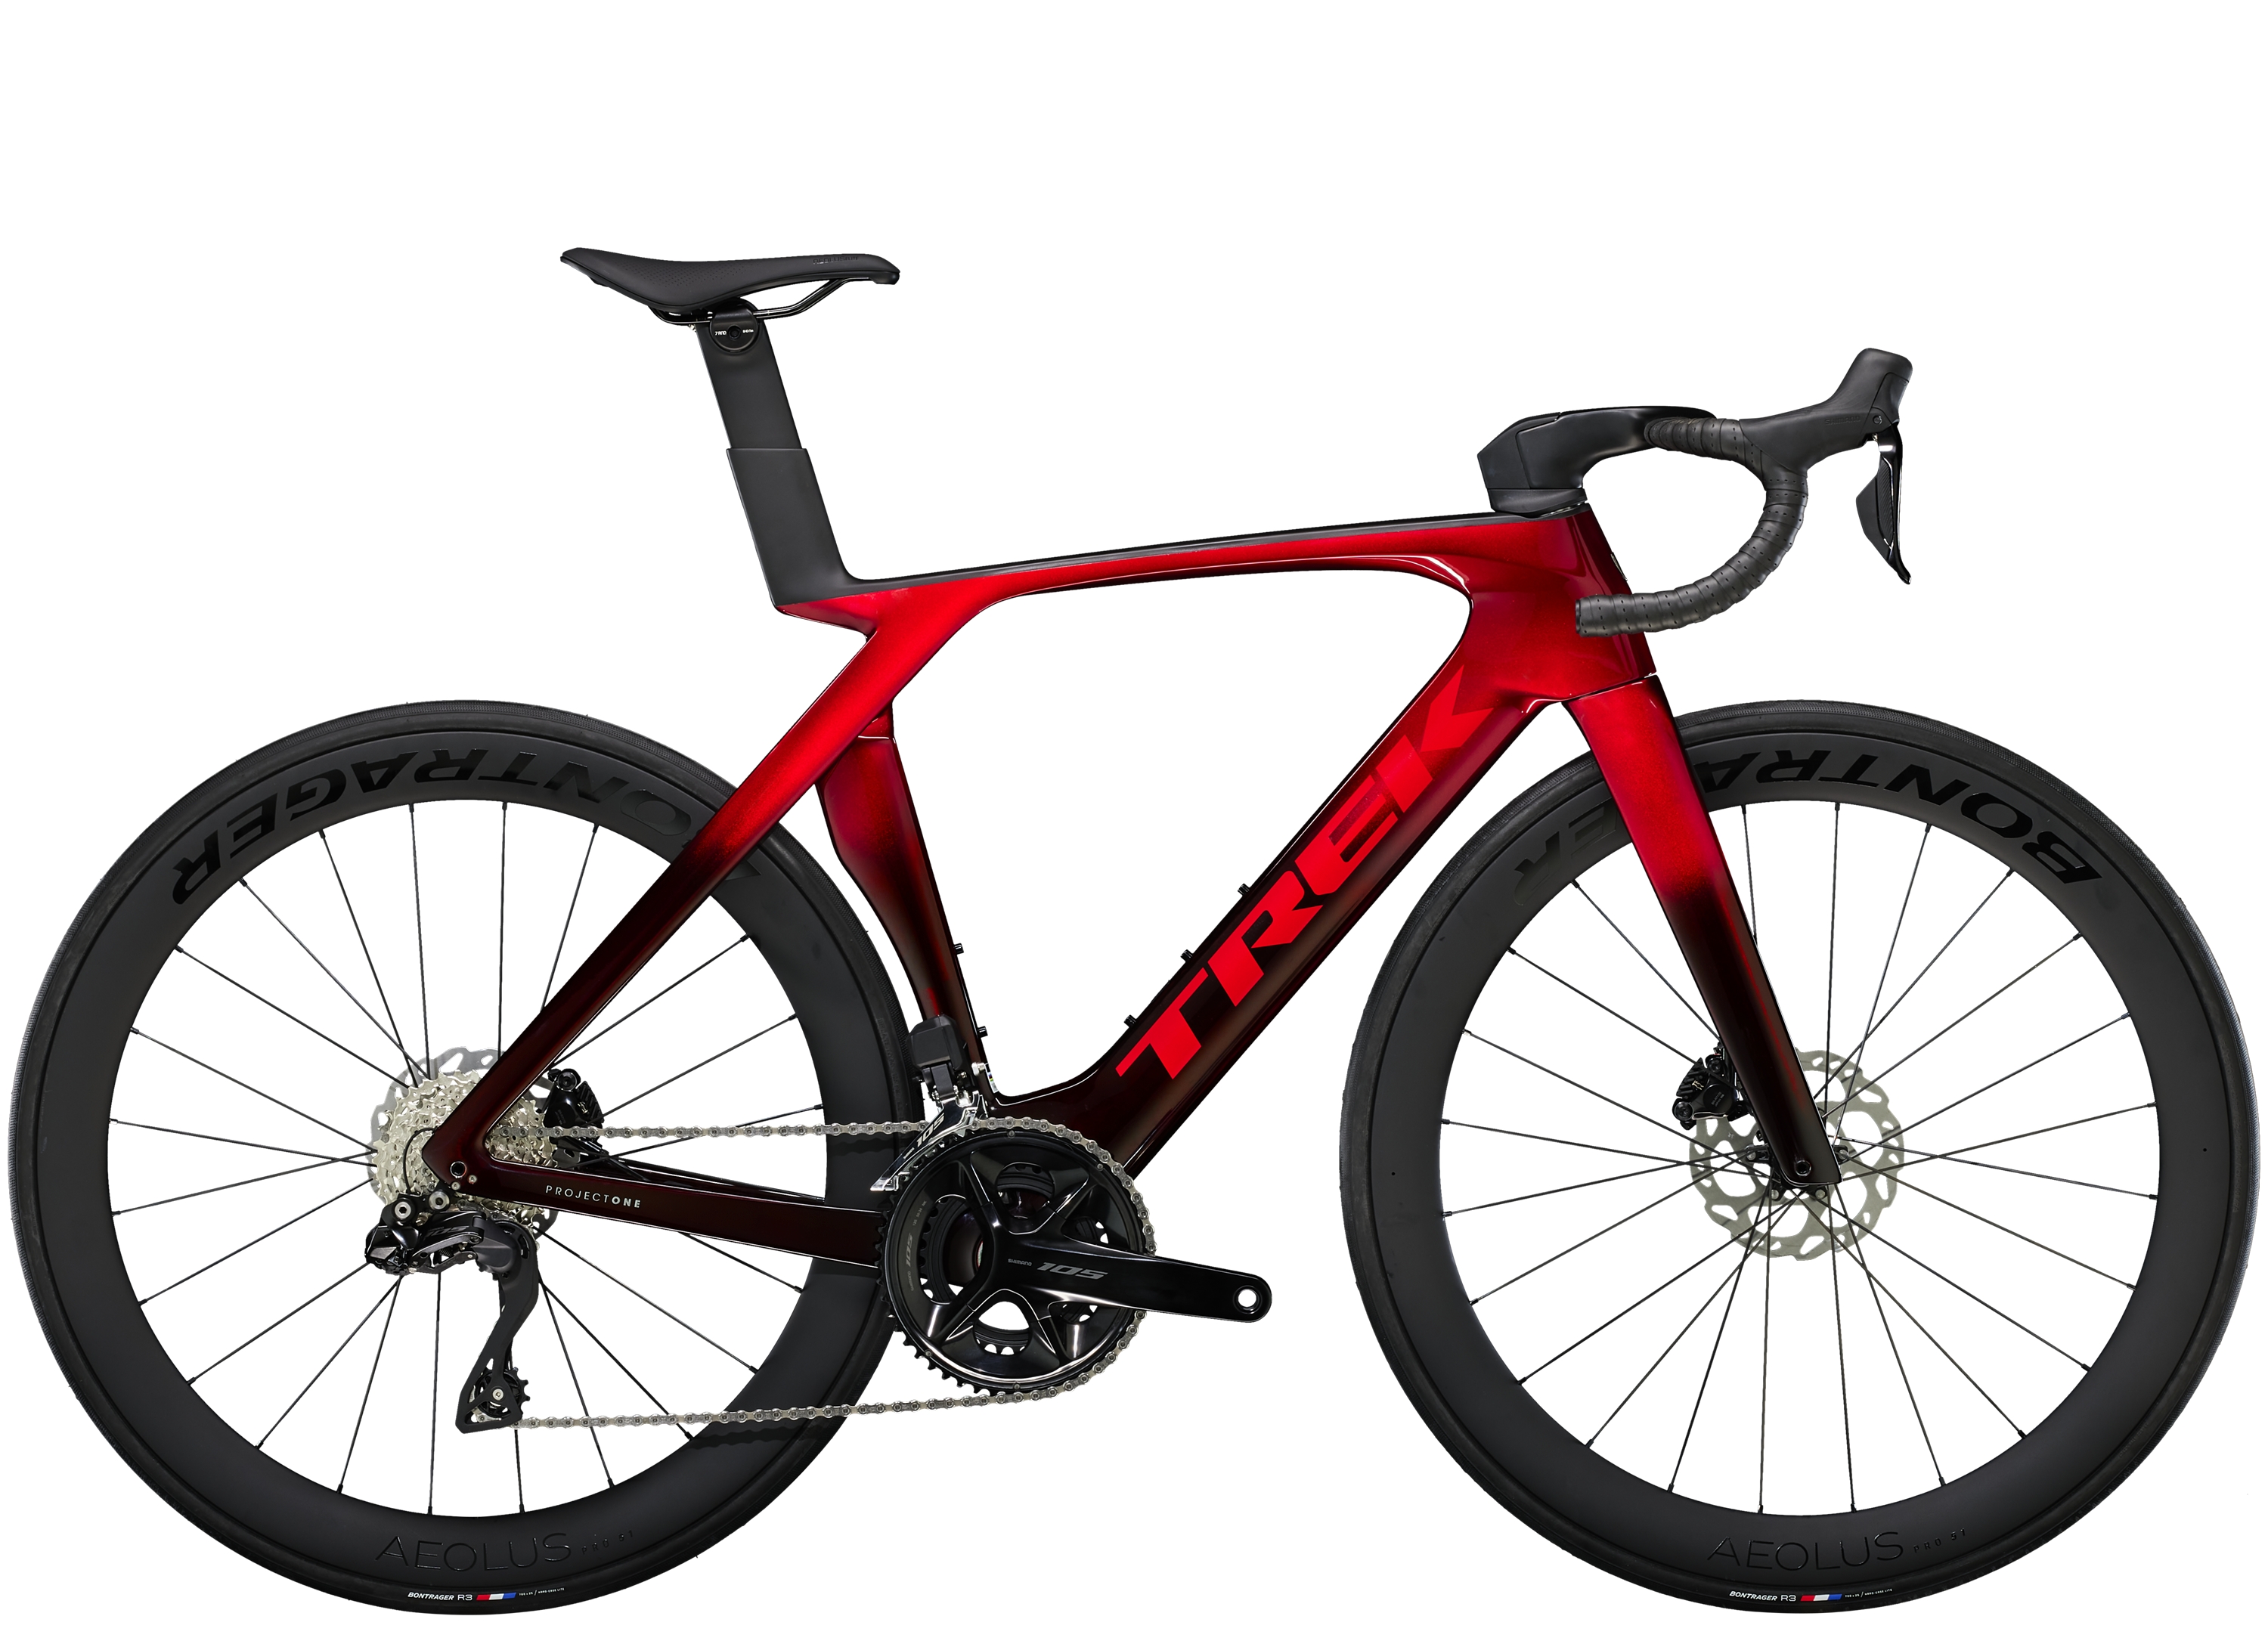 <a href="https://cycles-clement.be/product/madone-slr-6-54-metallic-red-smoke-to-red-carbon-s/">MADONE SLR 6 54 METALLIC RED SMOKE TO RED CARBON S</a>